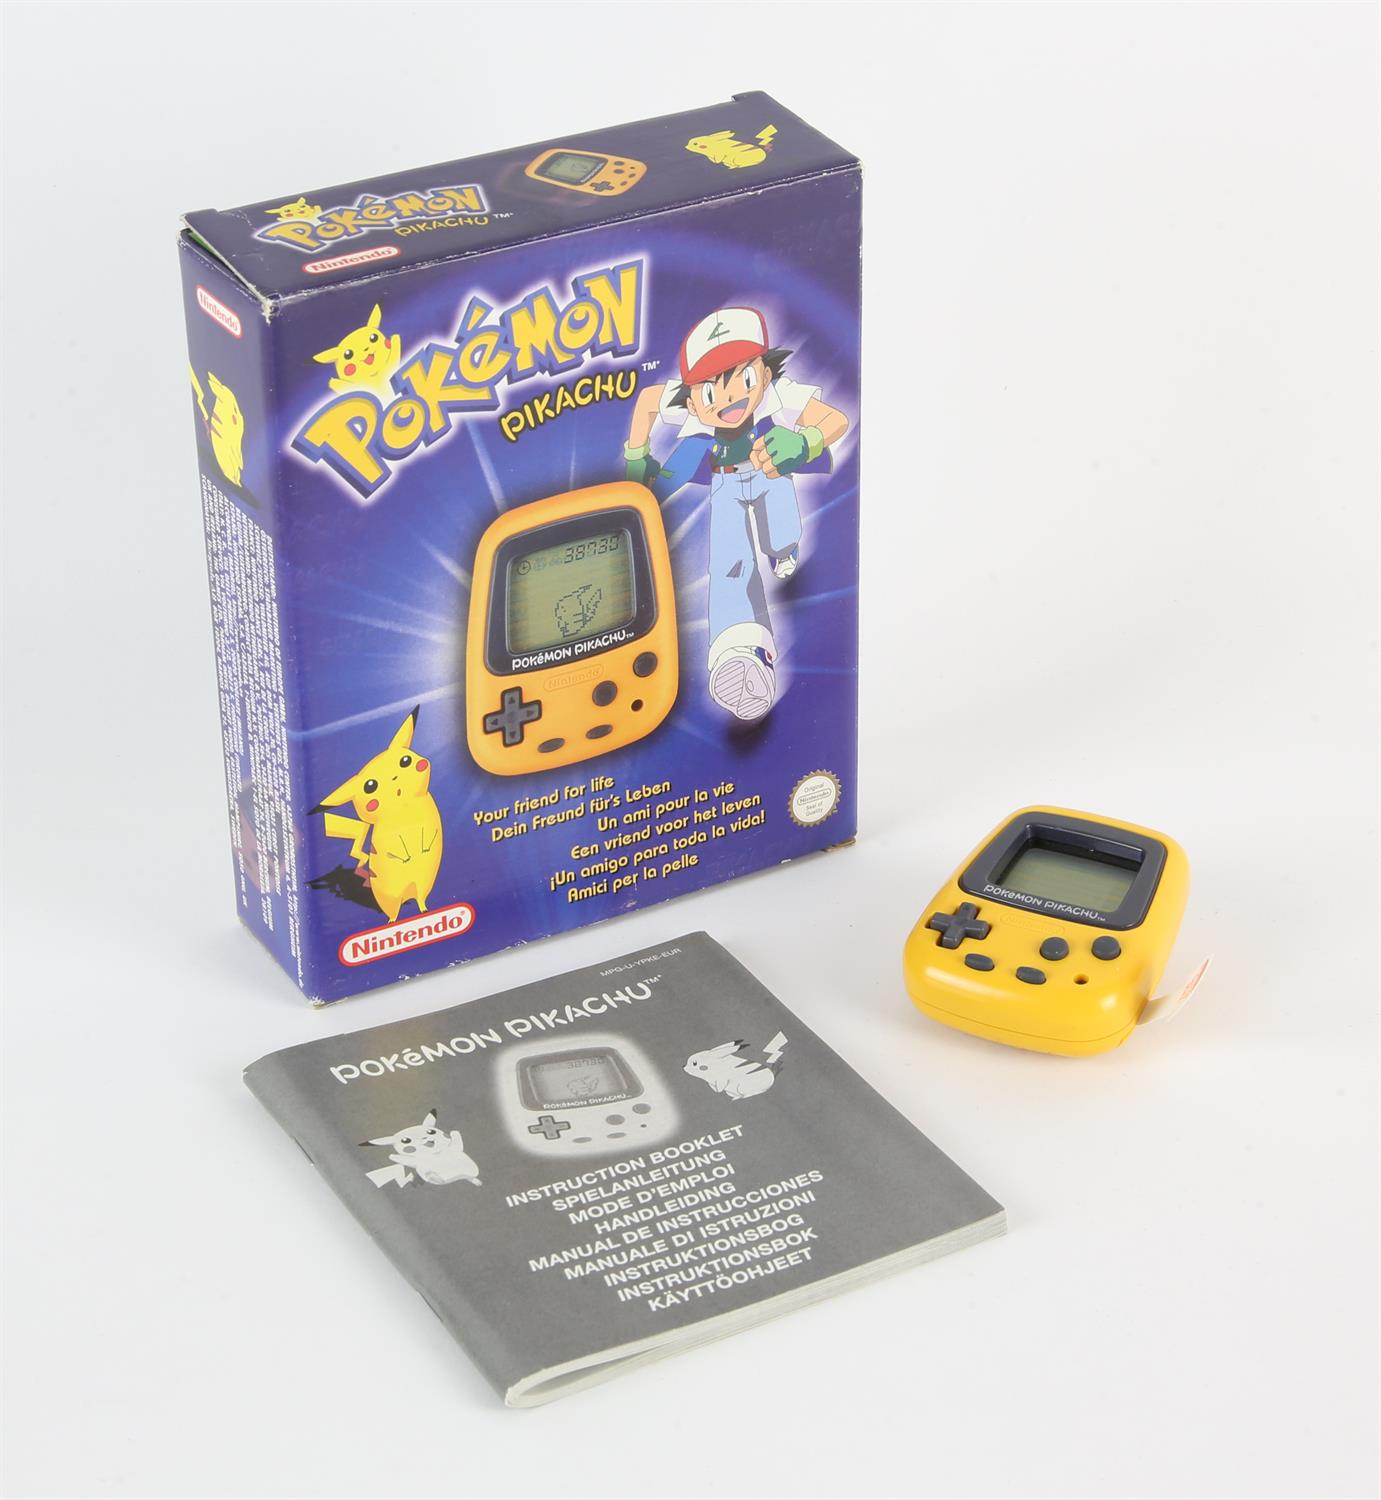 Boxed Pokémon Pikachu Pocket Handheld Console from 1998